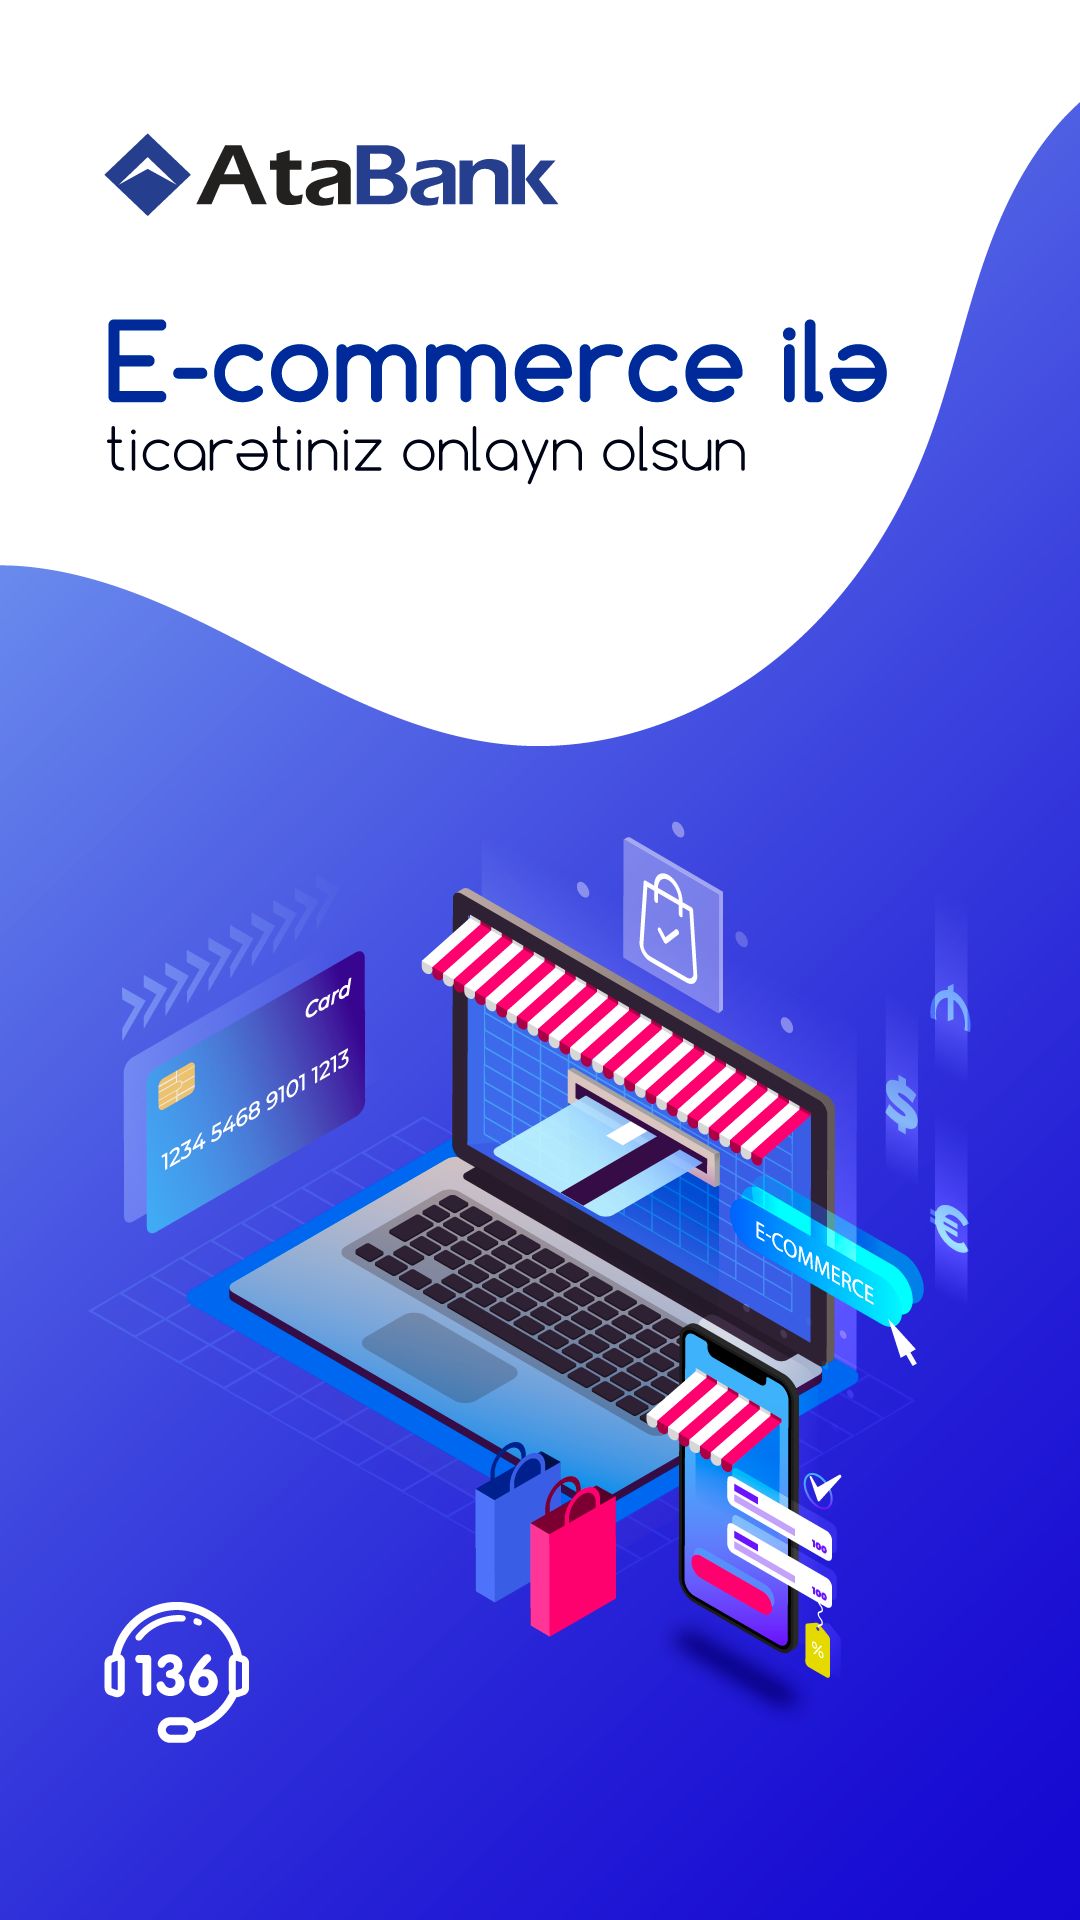 Turn your business into online with Azerbaijan's AtaBank